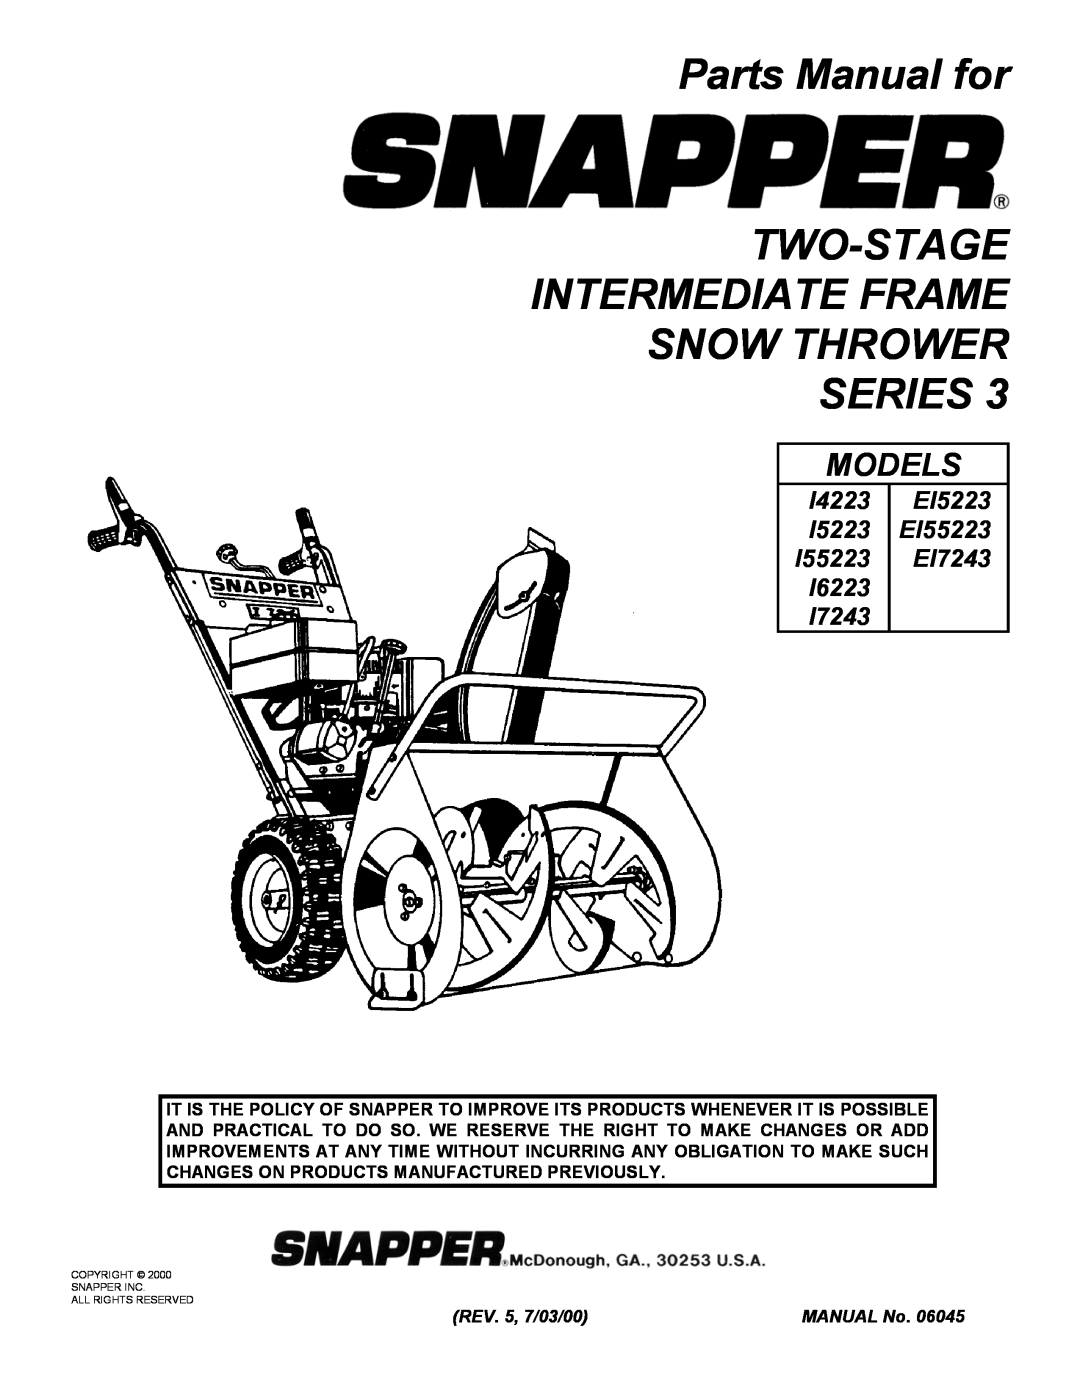 Snapper I55223 manual Parts Manual for TWO-STAGE INTERMEDIATE FRAME, Snow Thrower Series, Models, I7243, REV. 5, 7/03/00 